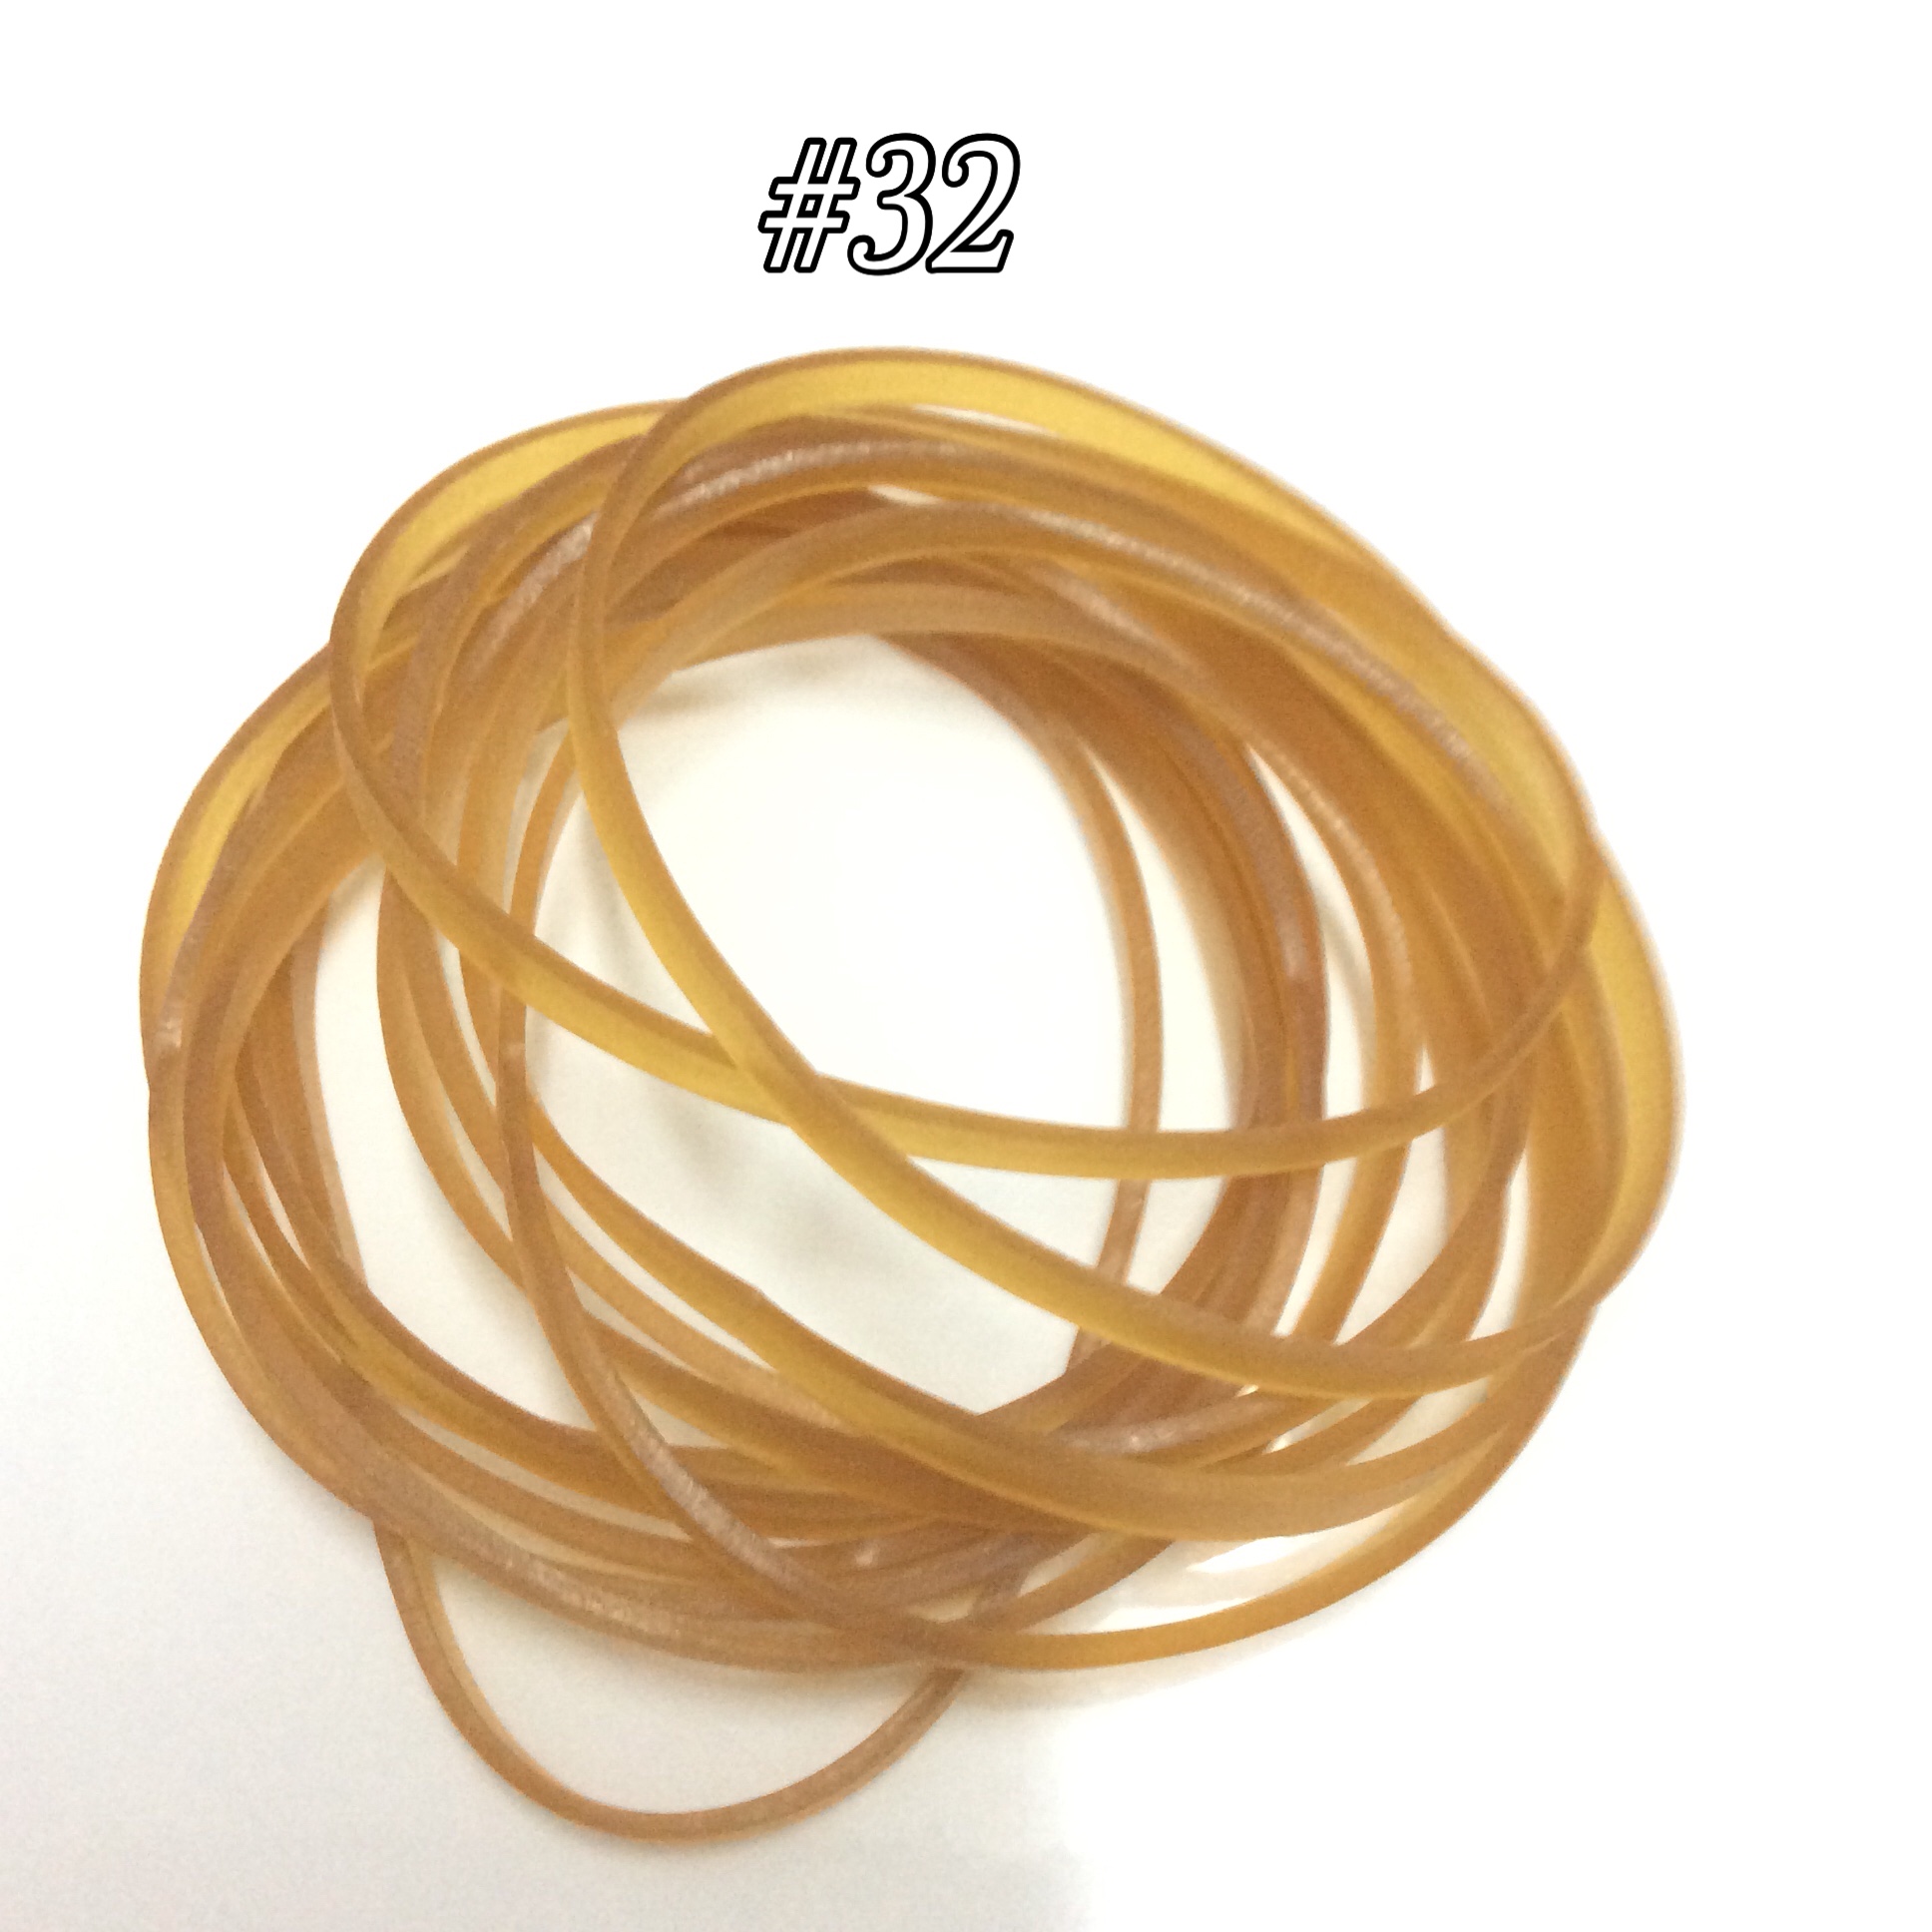 Durable Thailand rubber bands. Size #88. Export Price.